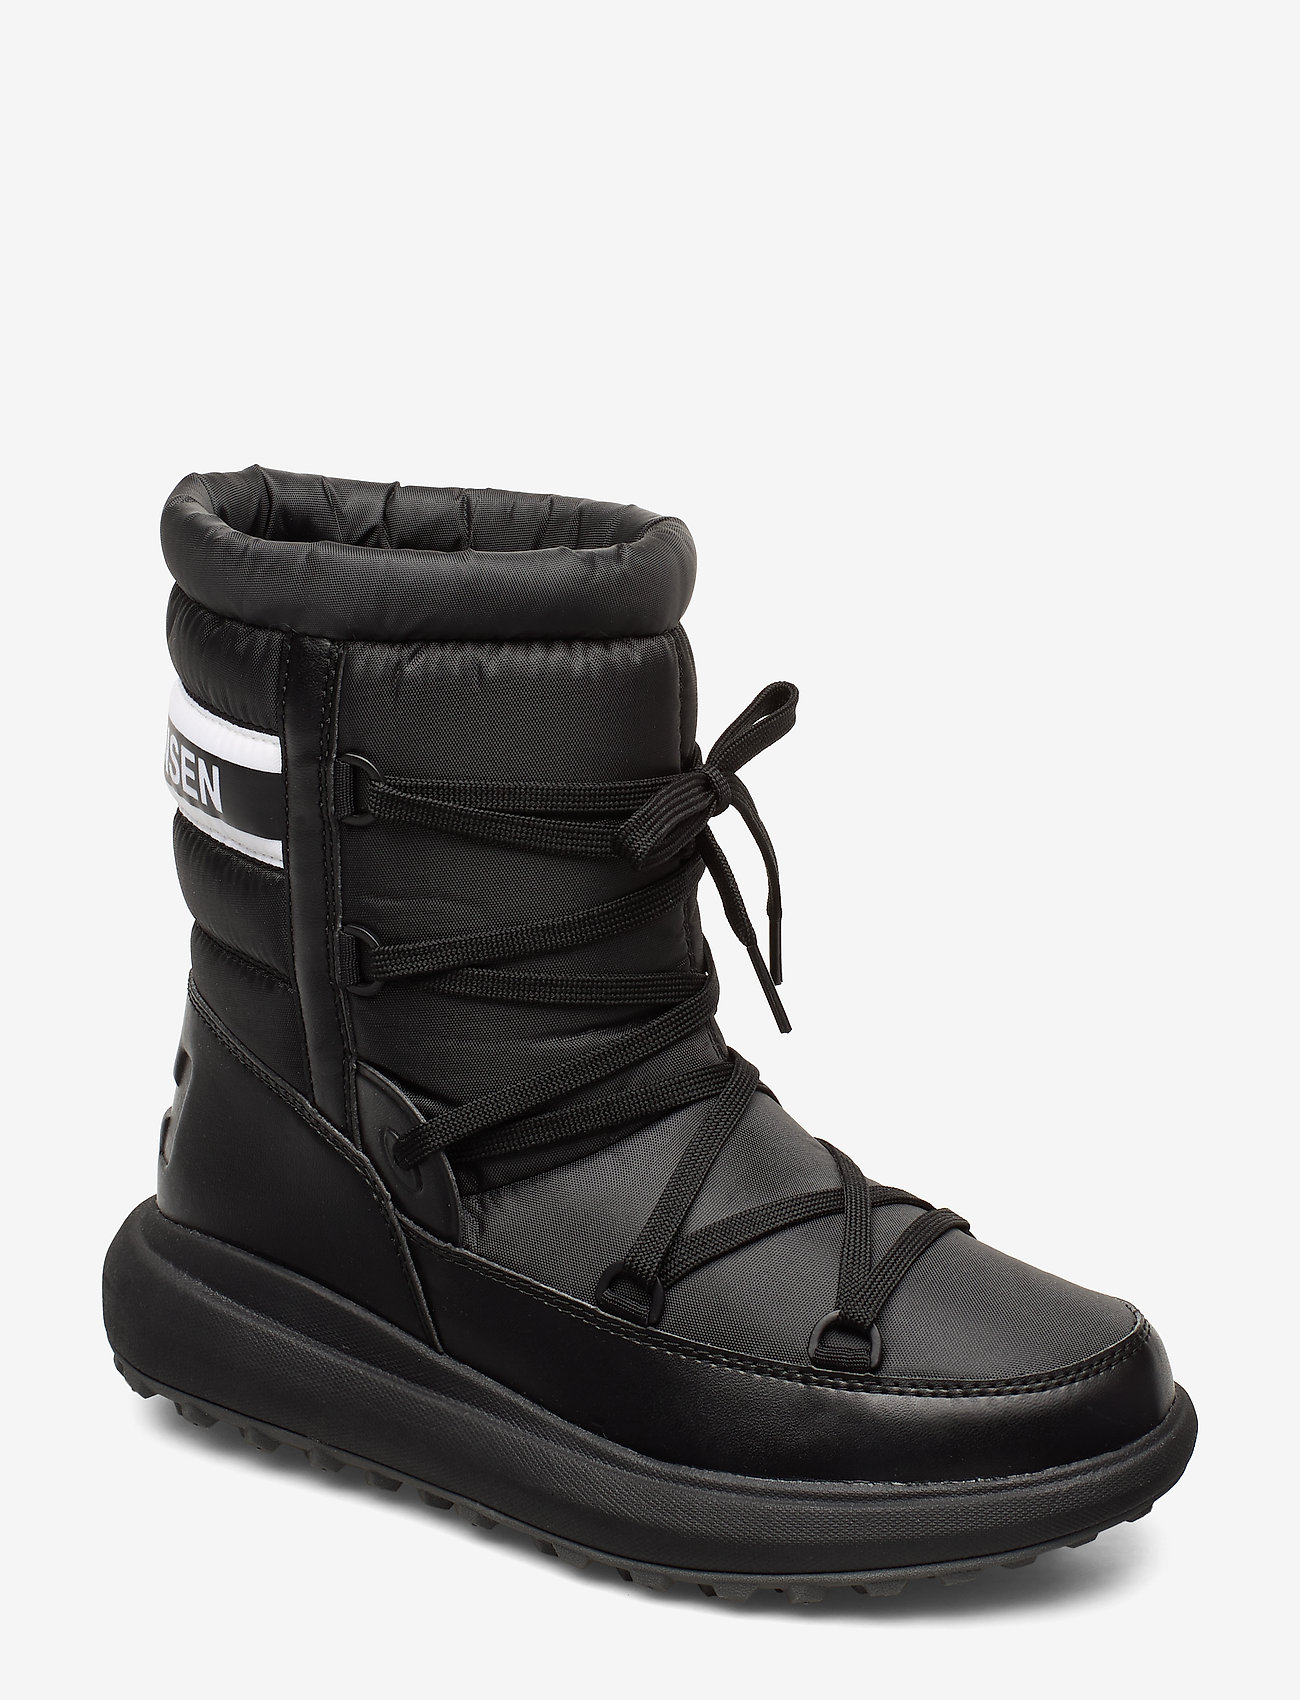 Helly Hansen W Isolabella Court - Flat ankle boots | Boozt.com